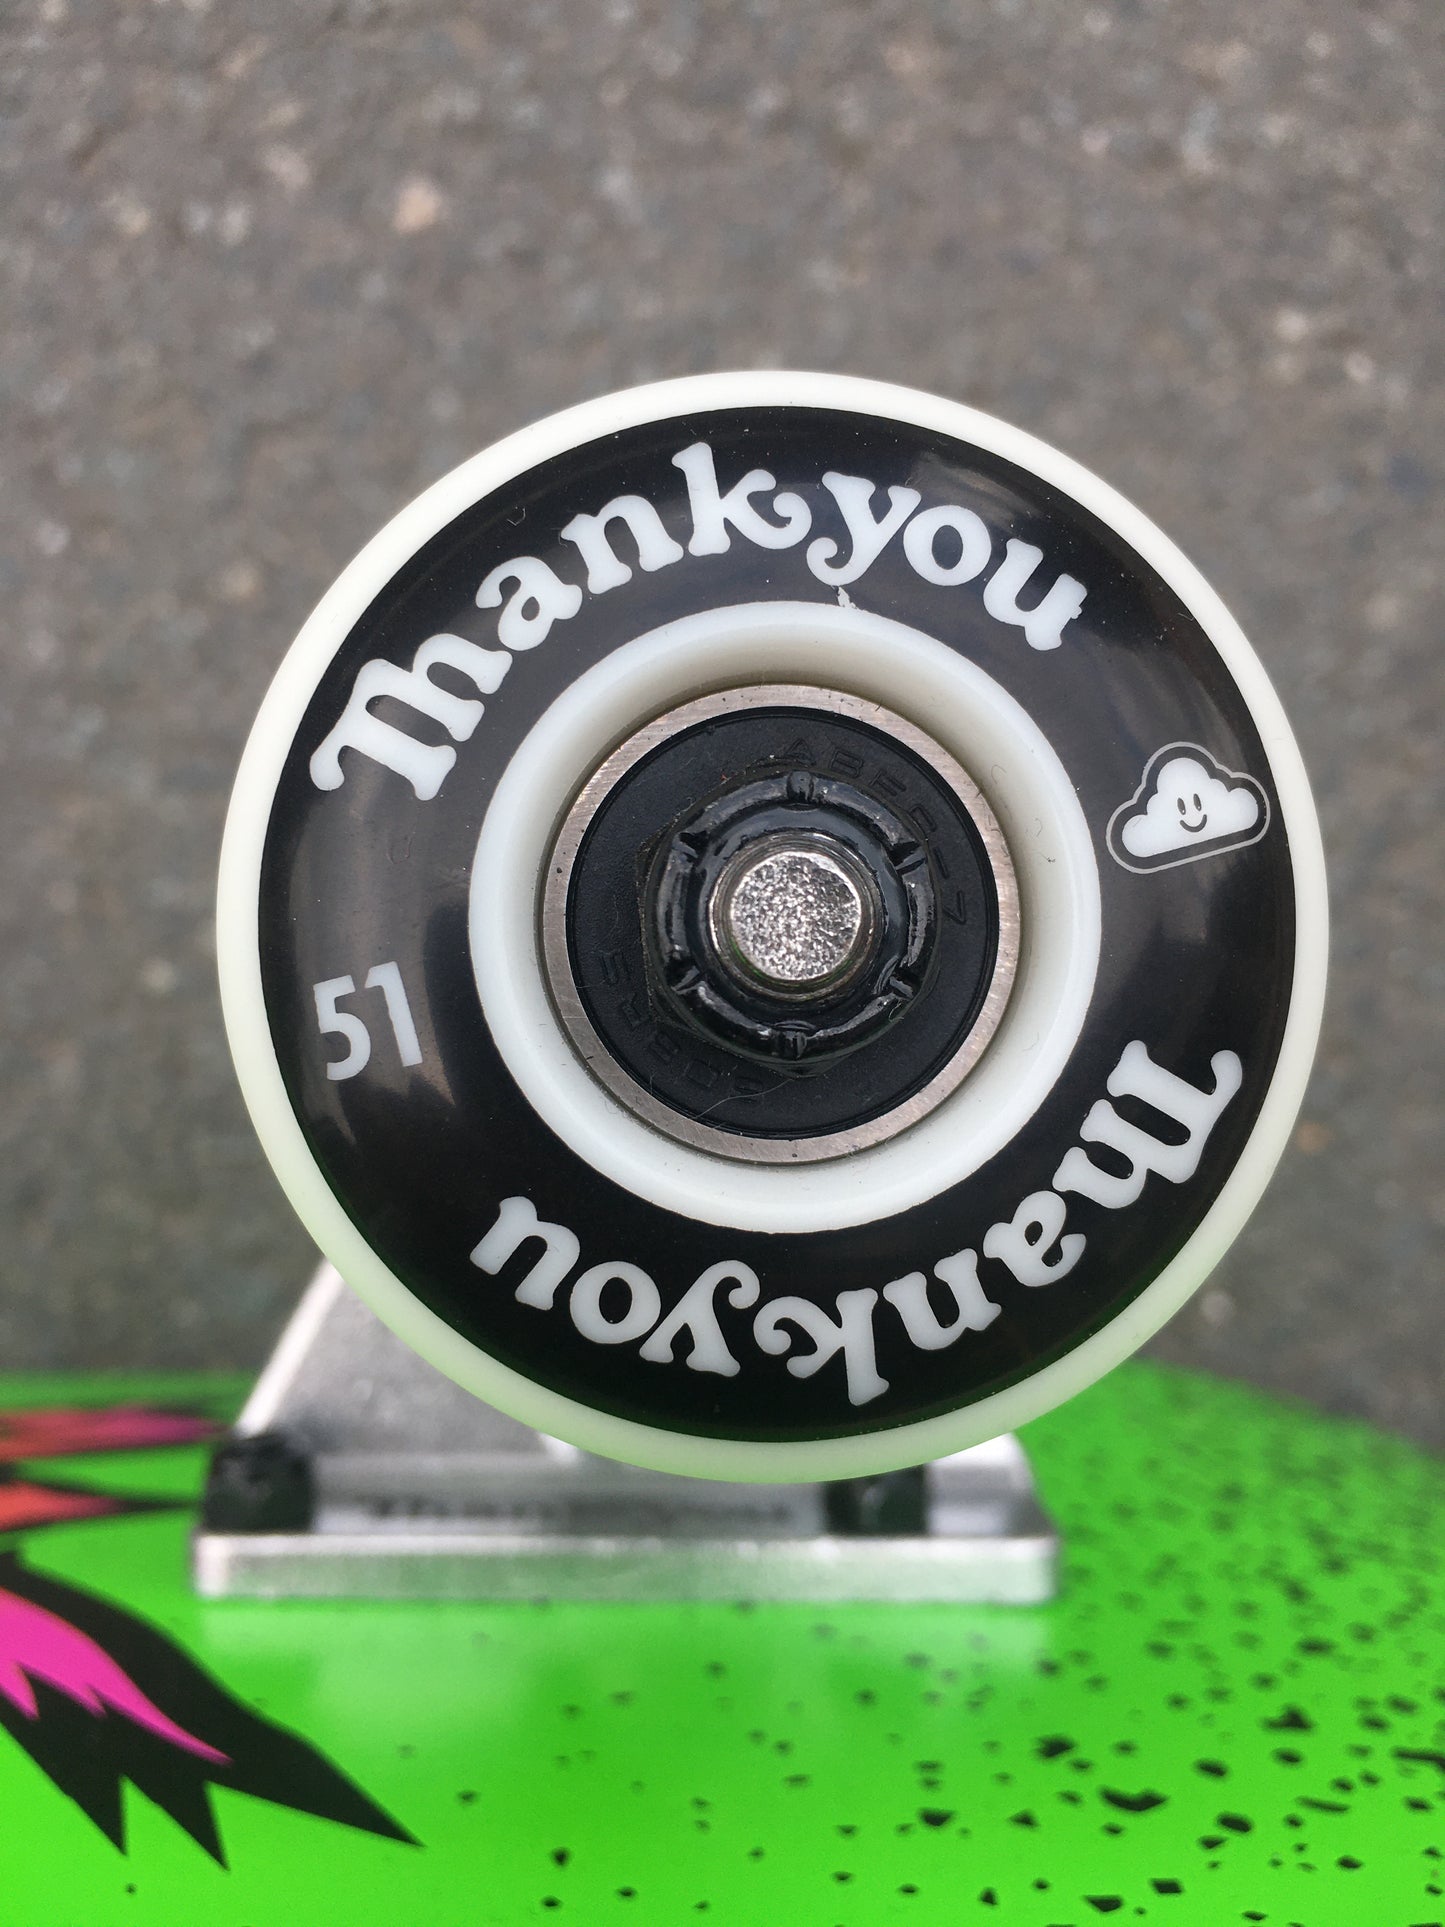 THANK YOU - SKULL CLOUD COMPLETE - NEON - 7.75